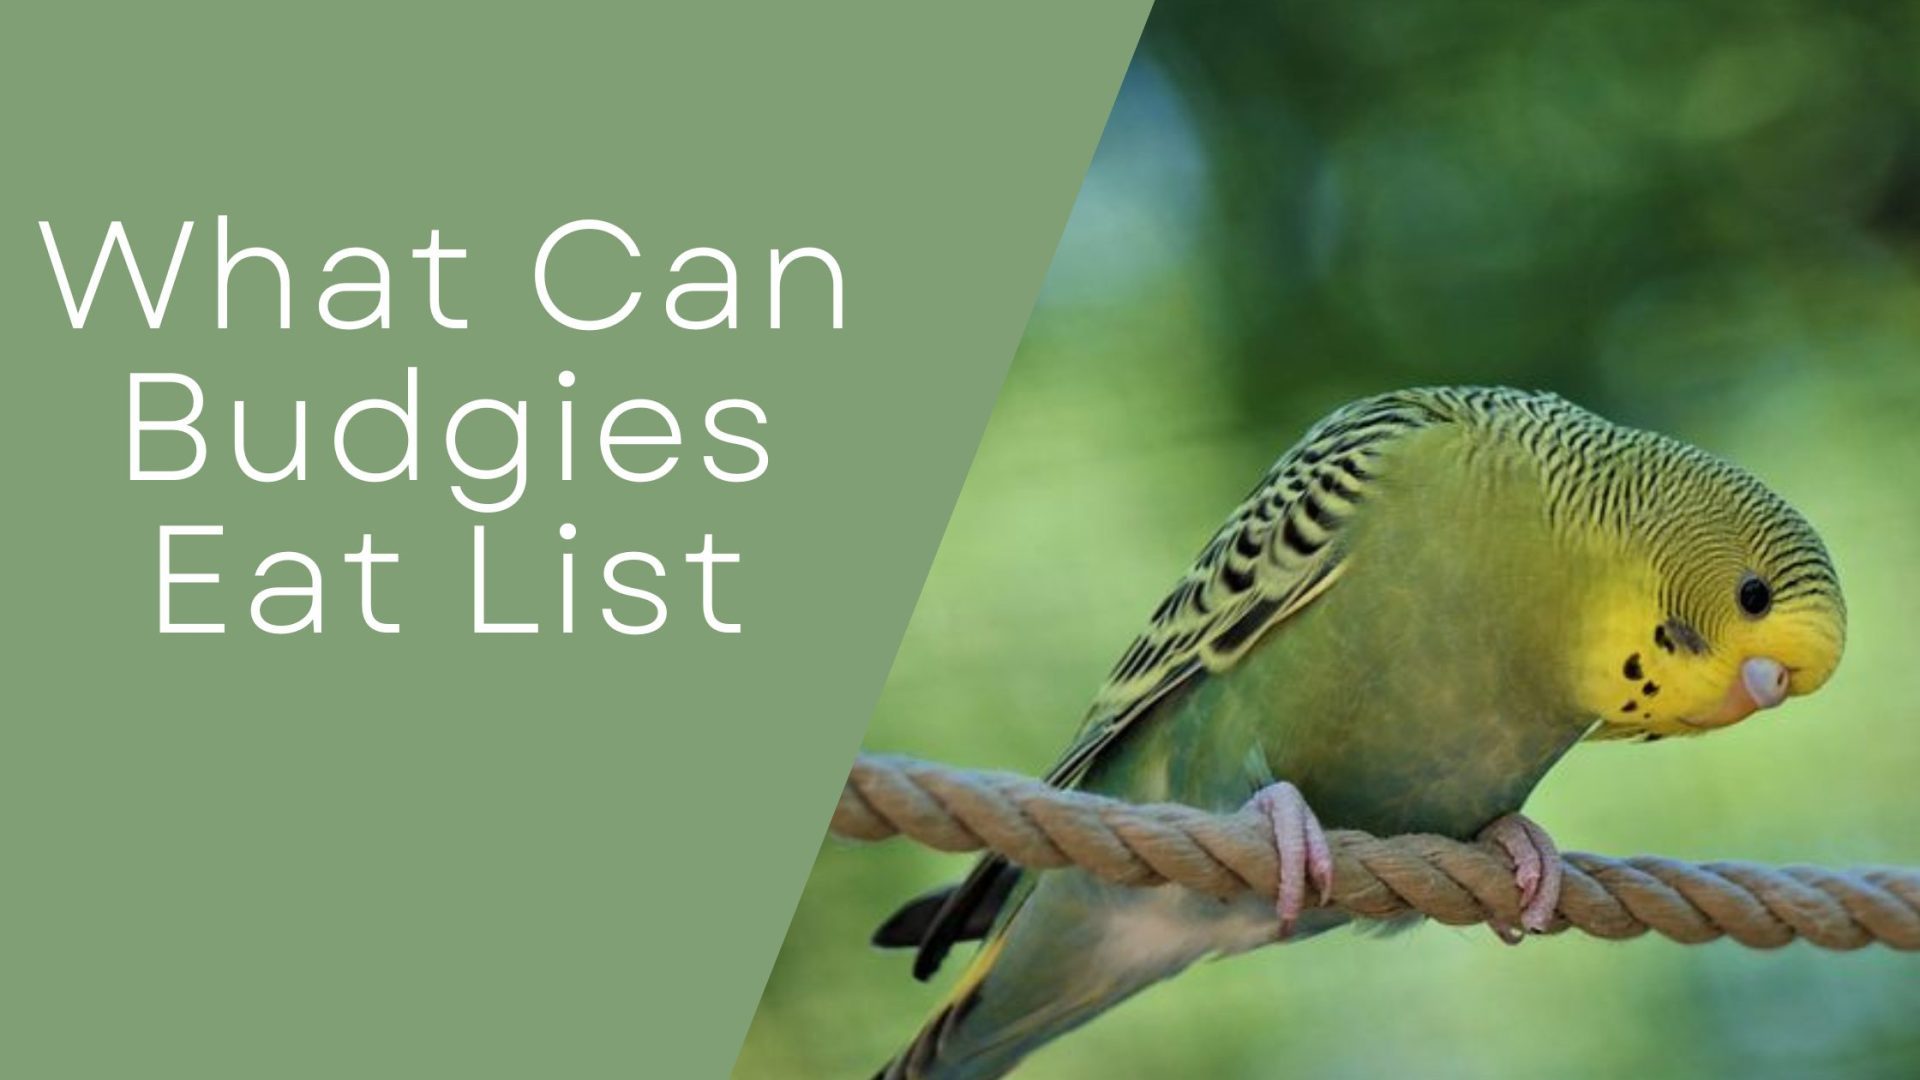 What Can Budgies Eat List